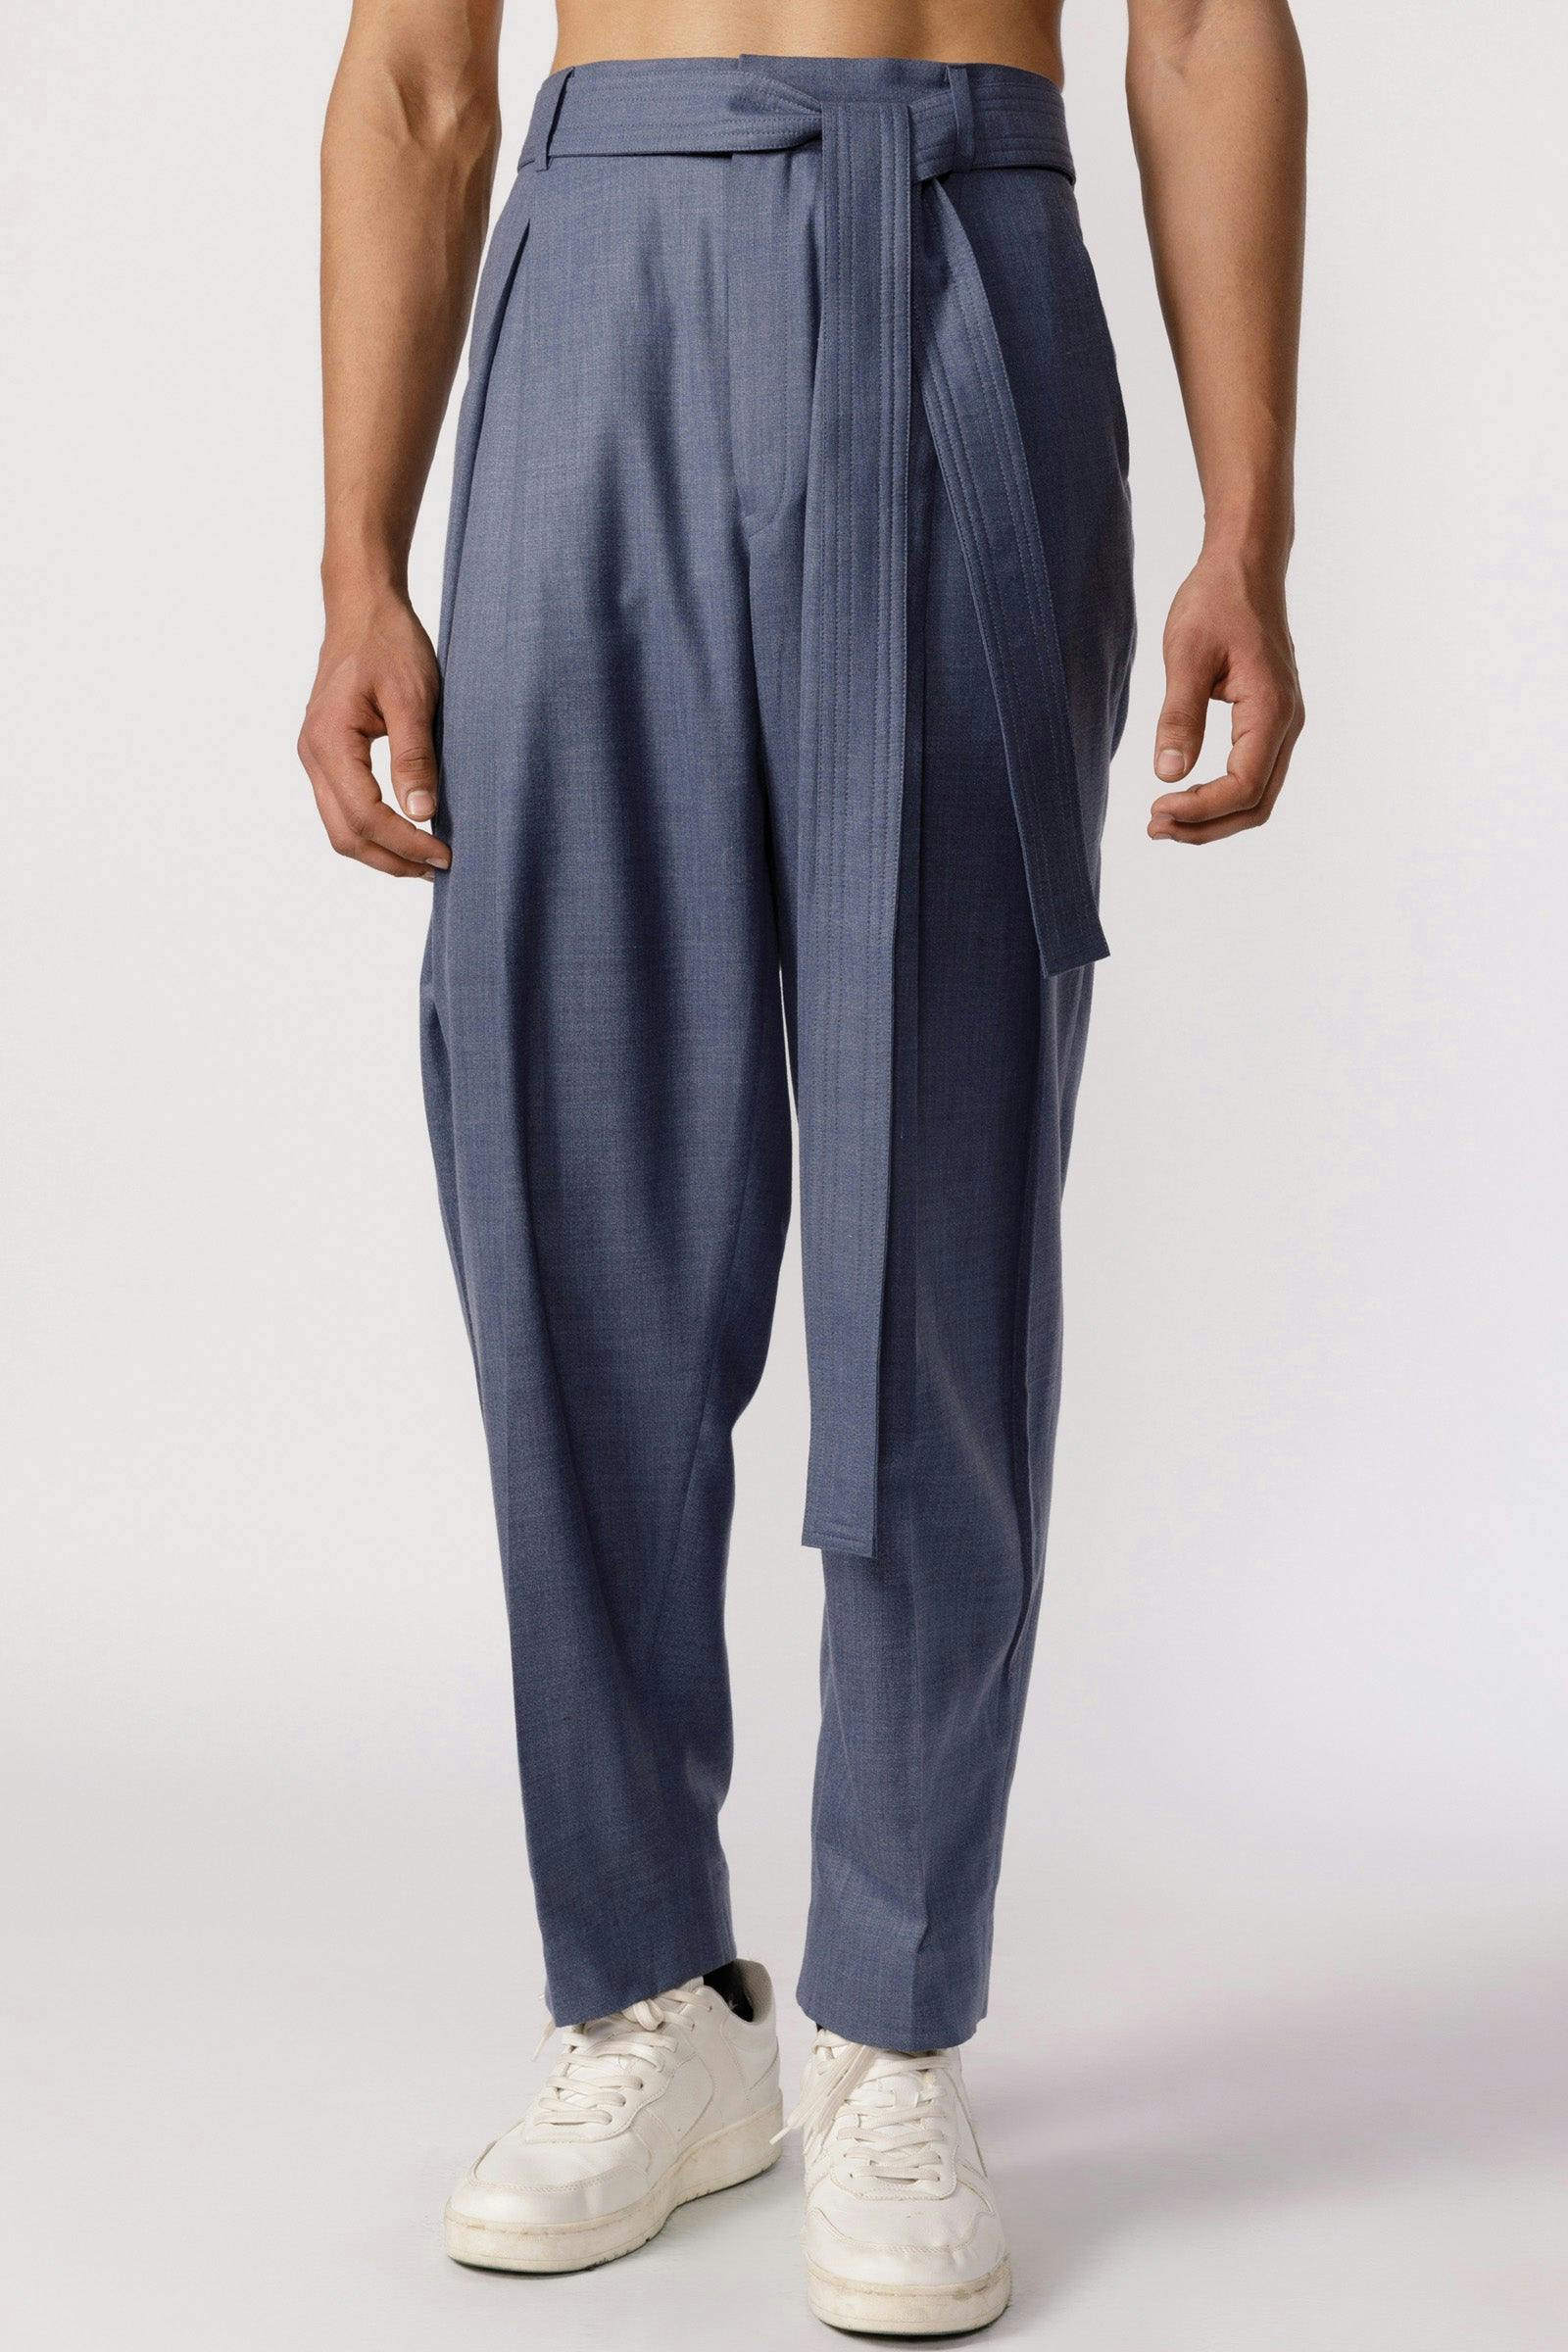 High waisted Pleated pants, a product by Line Outline